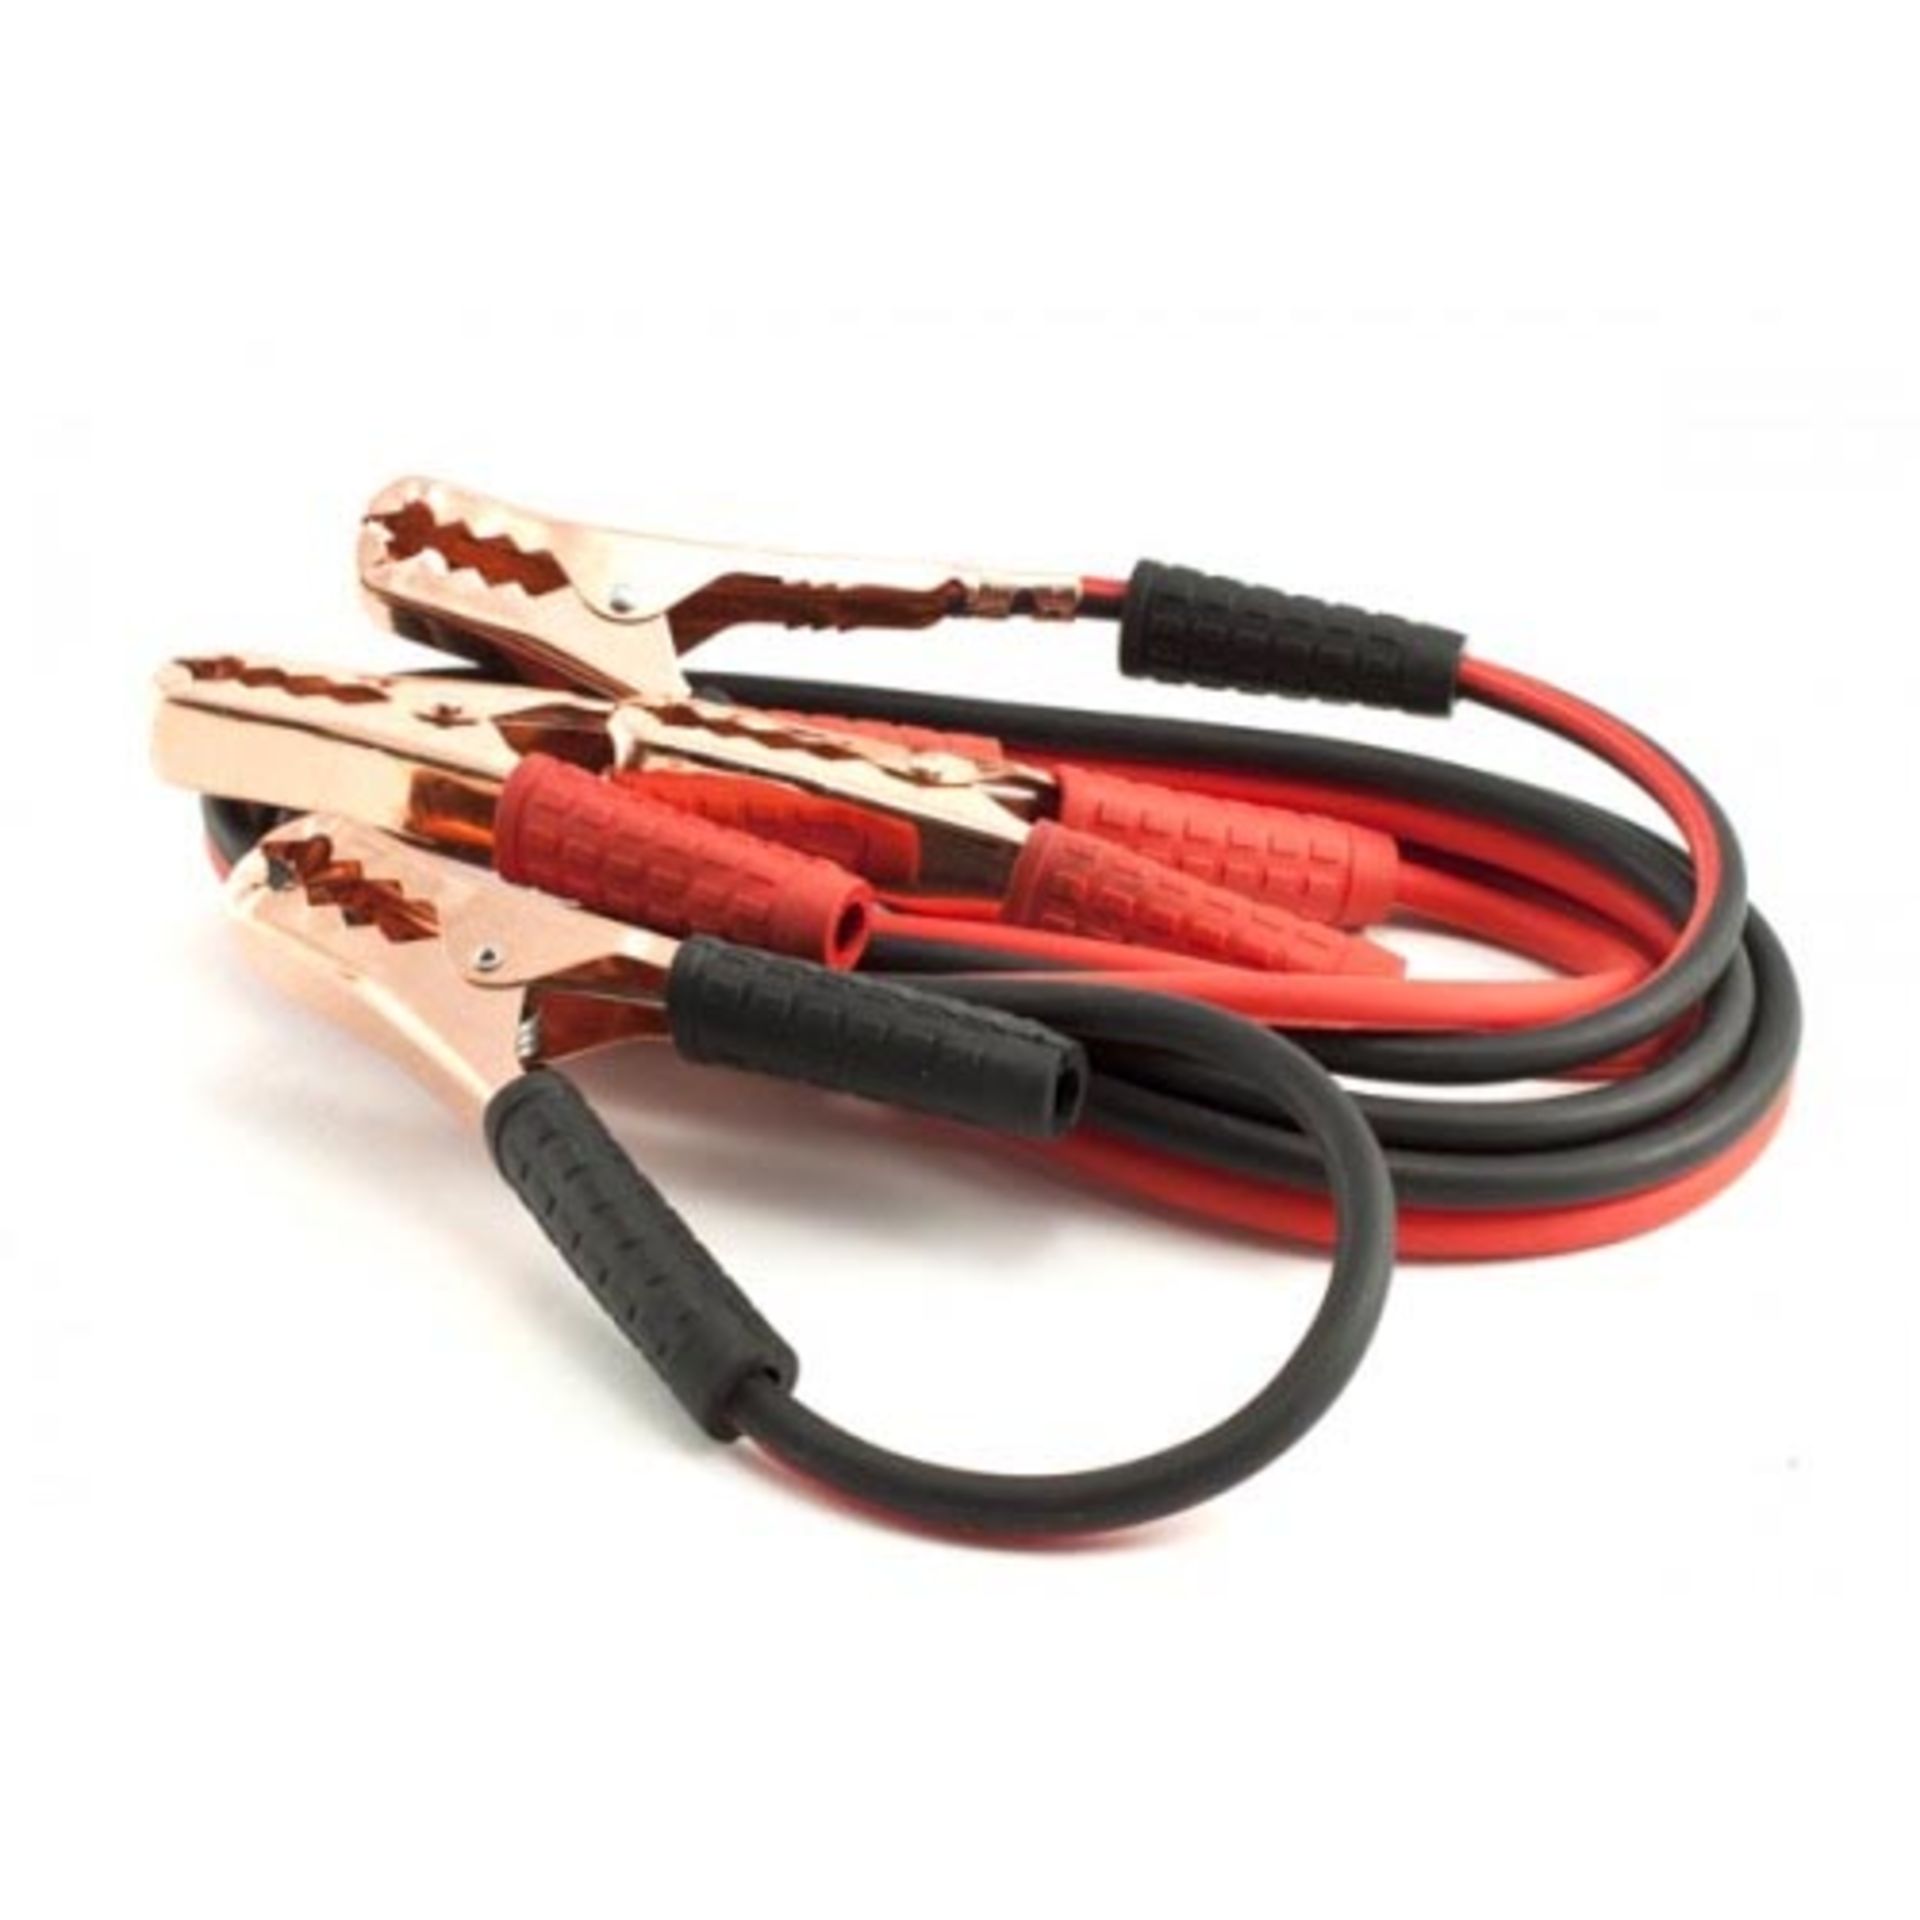 V Brand New 200AMP Booster Cables X 2 YOUR BID PRICE TO BE MULTIPLIED BY TWO